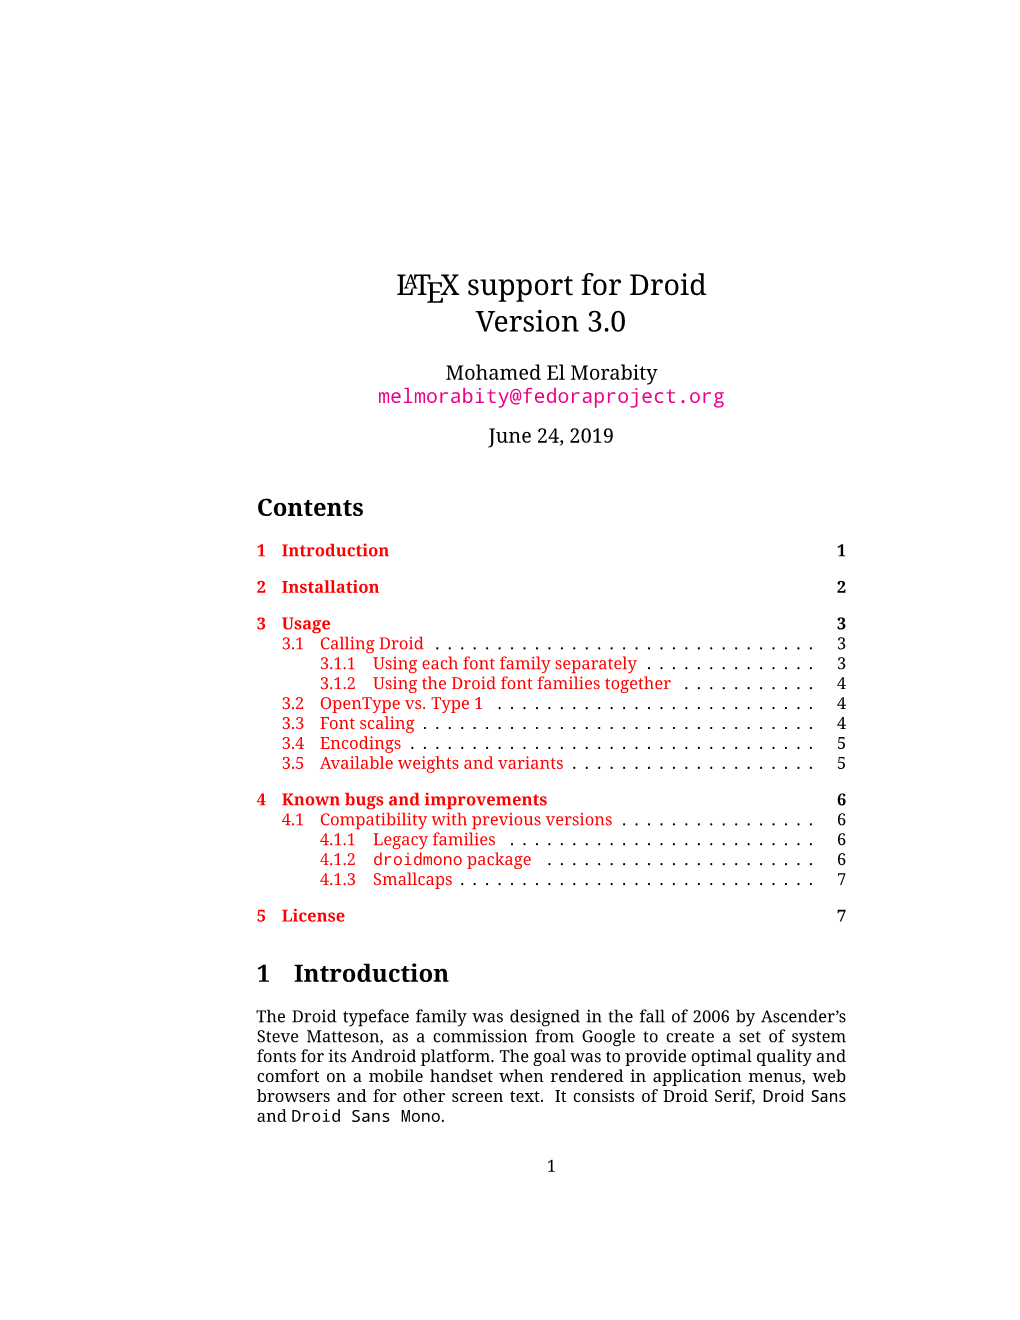 LATEX Support for Droid Version 3.0